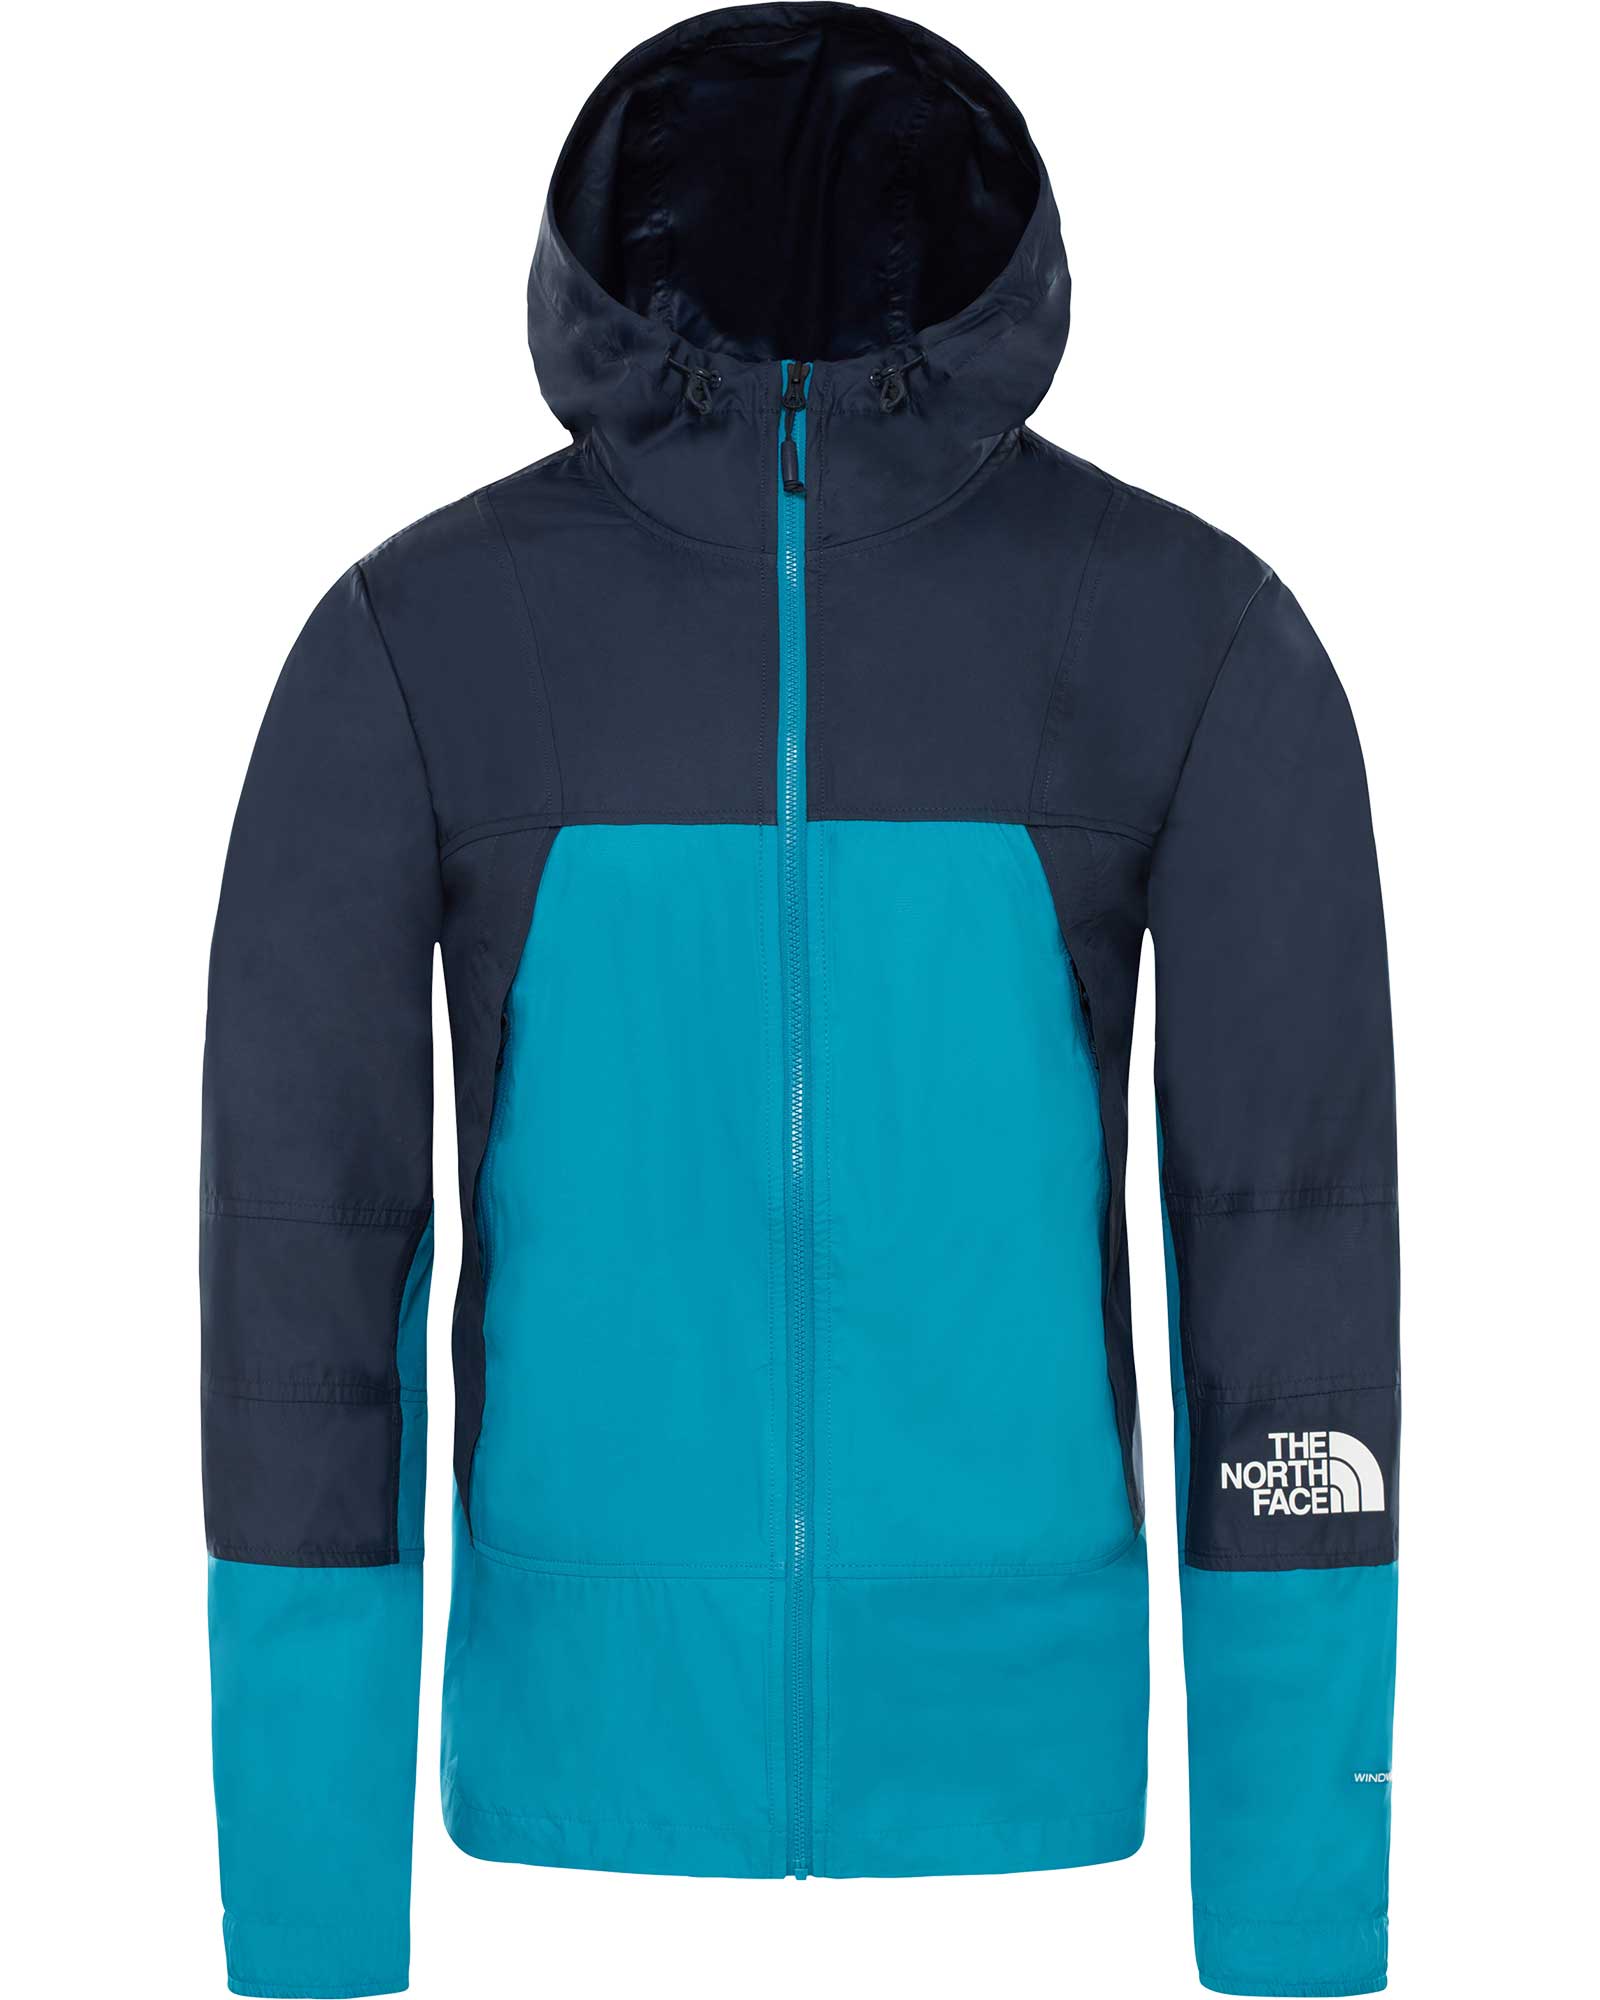 The North Face Men’s Mountain Light Windshell Jacket - Crystal Teal XL